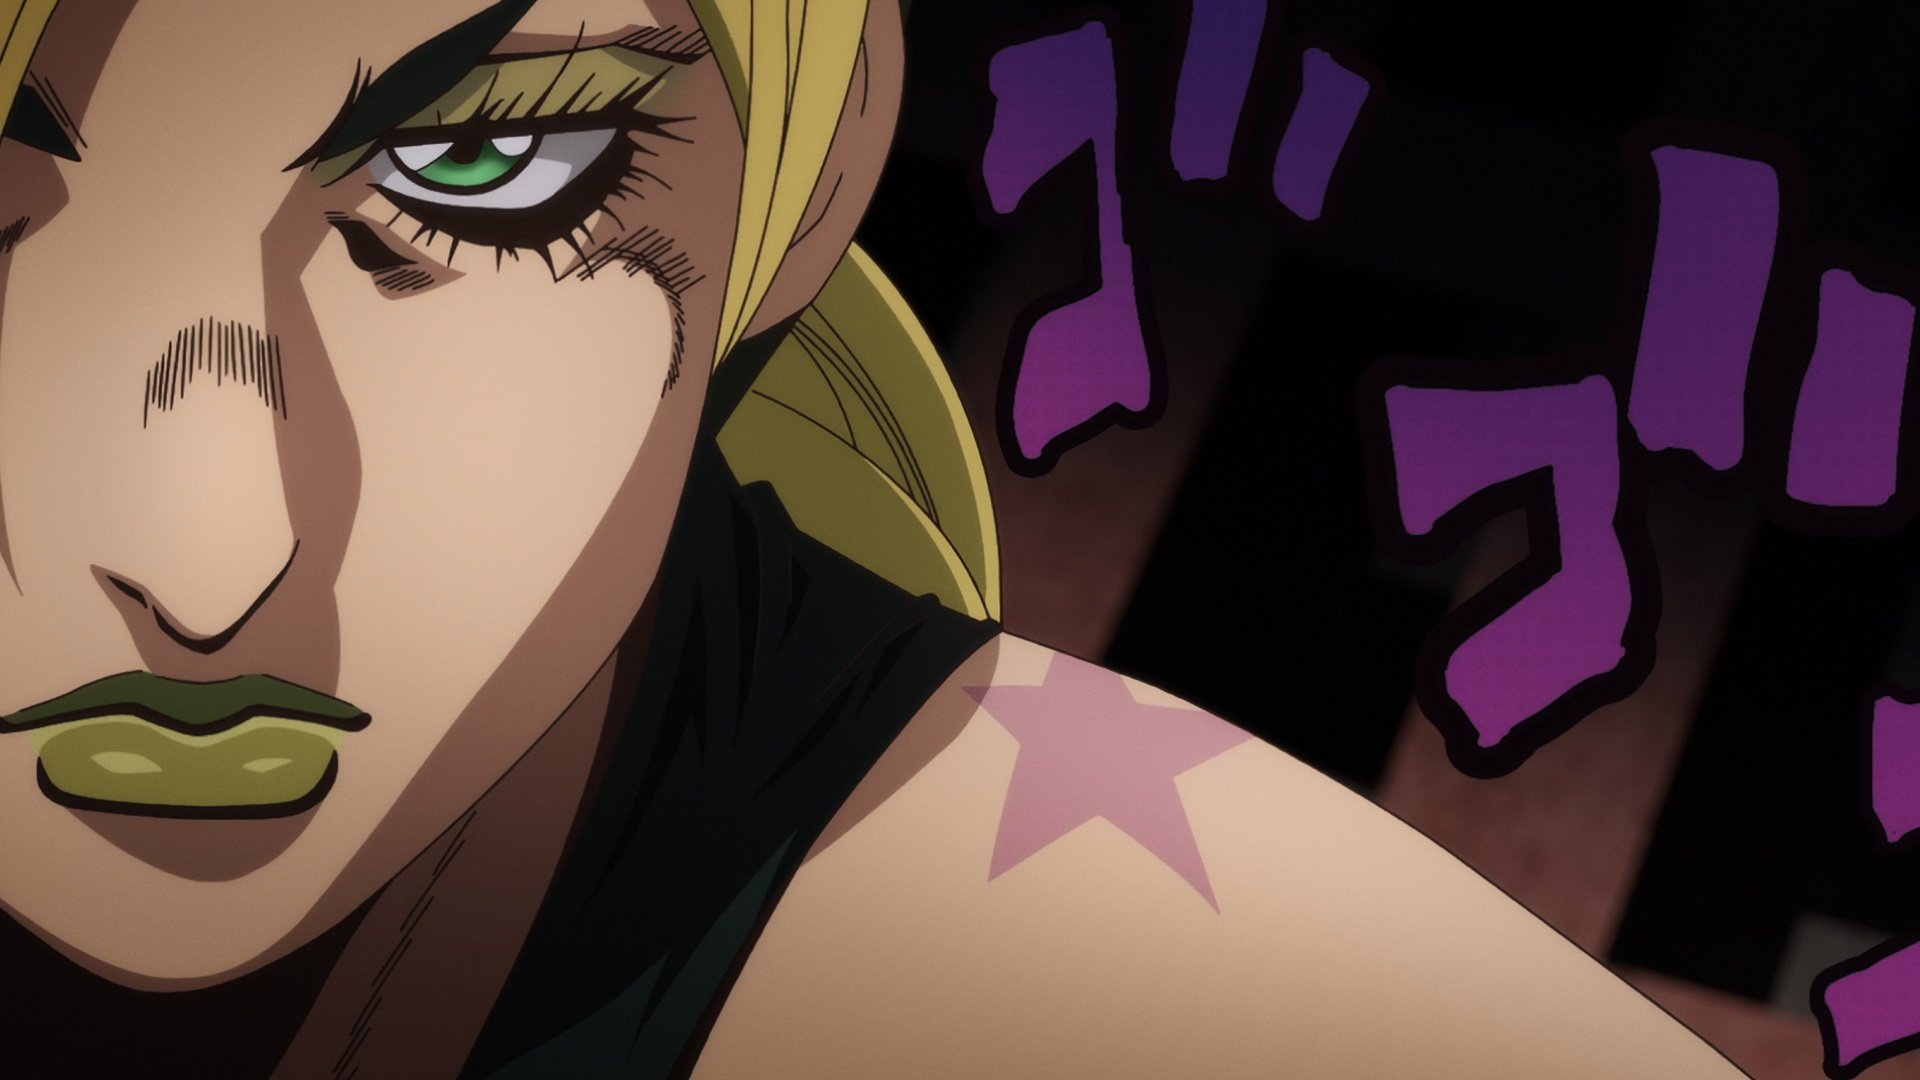 Jolyne Cujoh in 'JoJo's Bizarre Adventure' Part 6 on Netflix. The image is a close-up of her face, and there's a purple and black background.